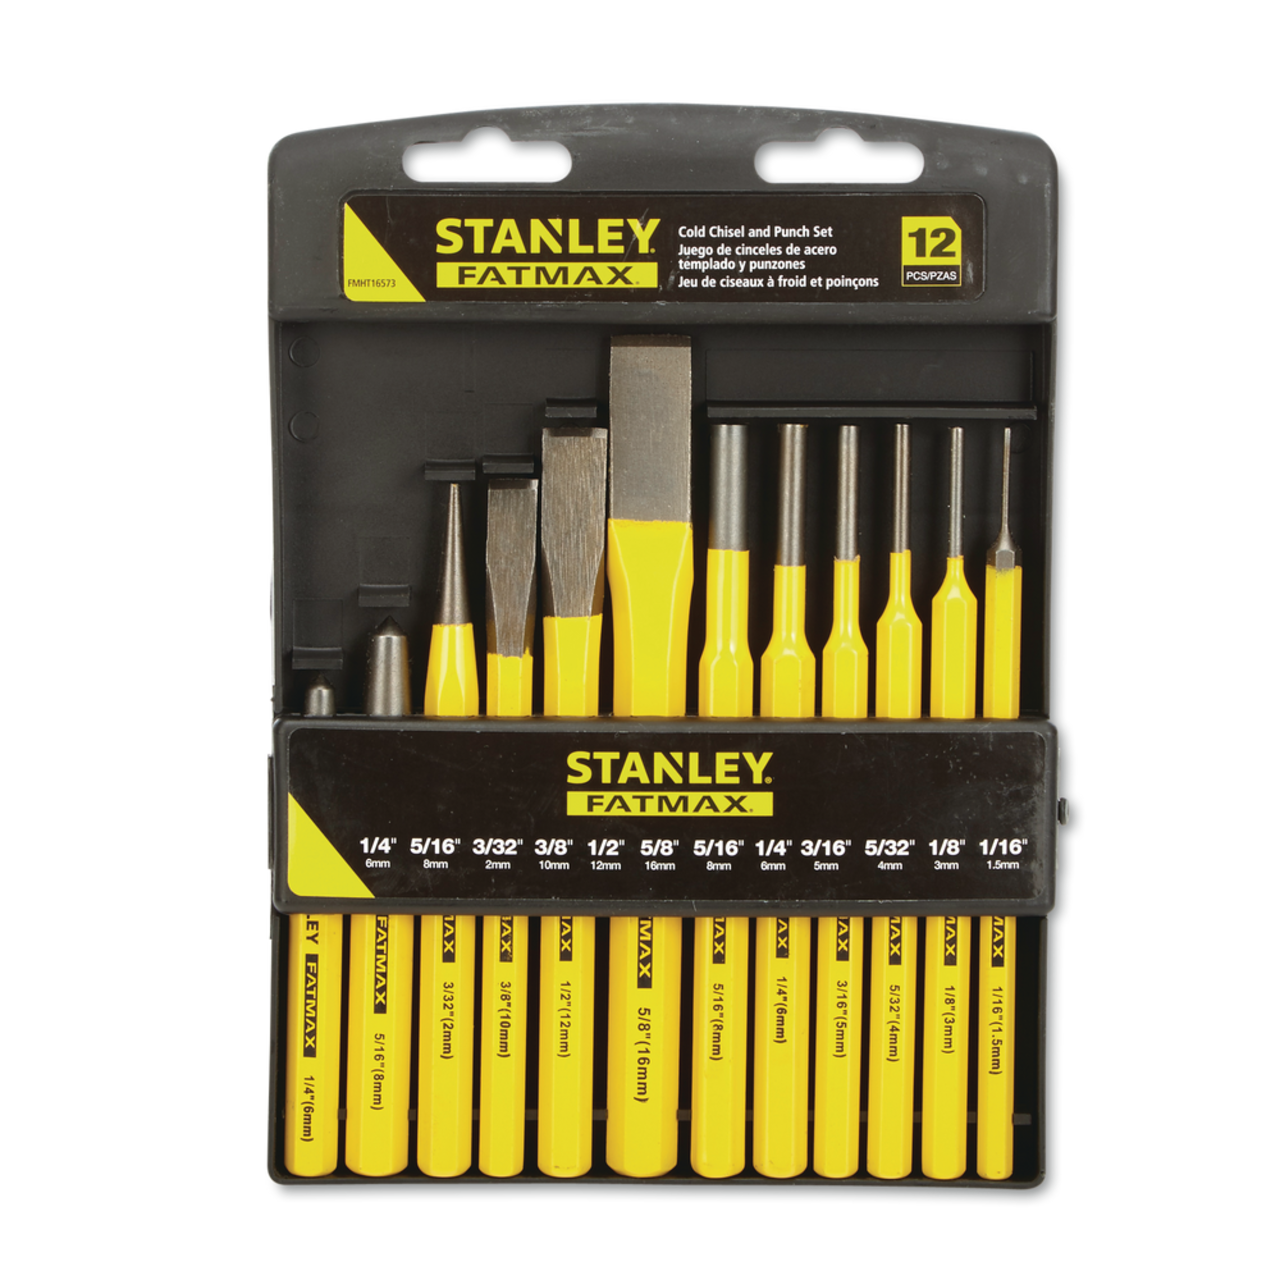 Vintage Stanley Cold Chisels and Punches Store Display 12 wide